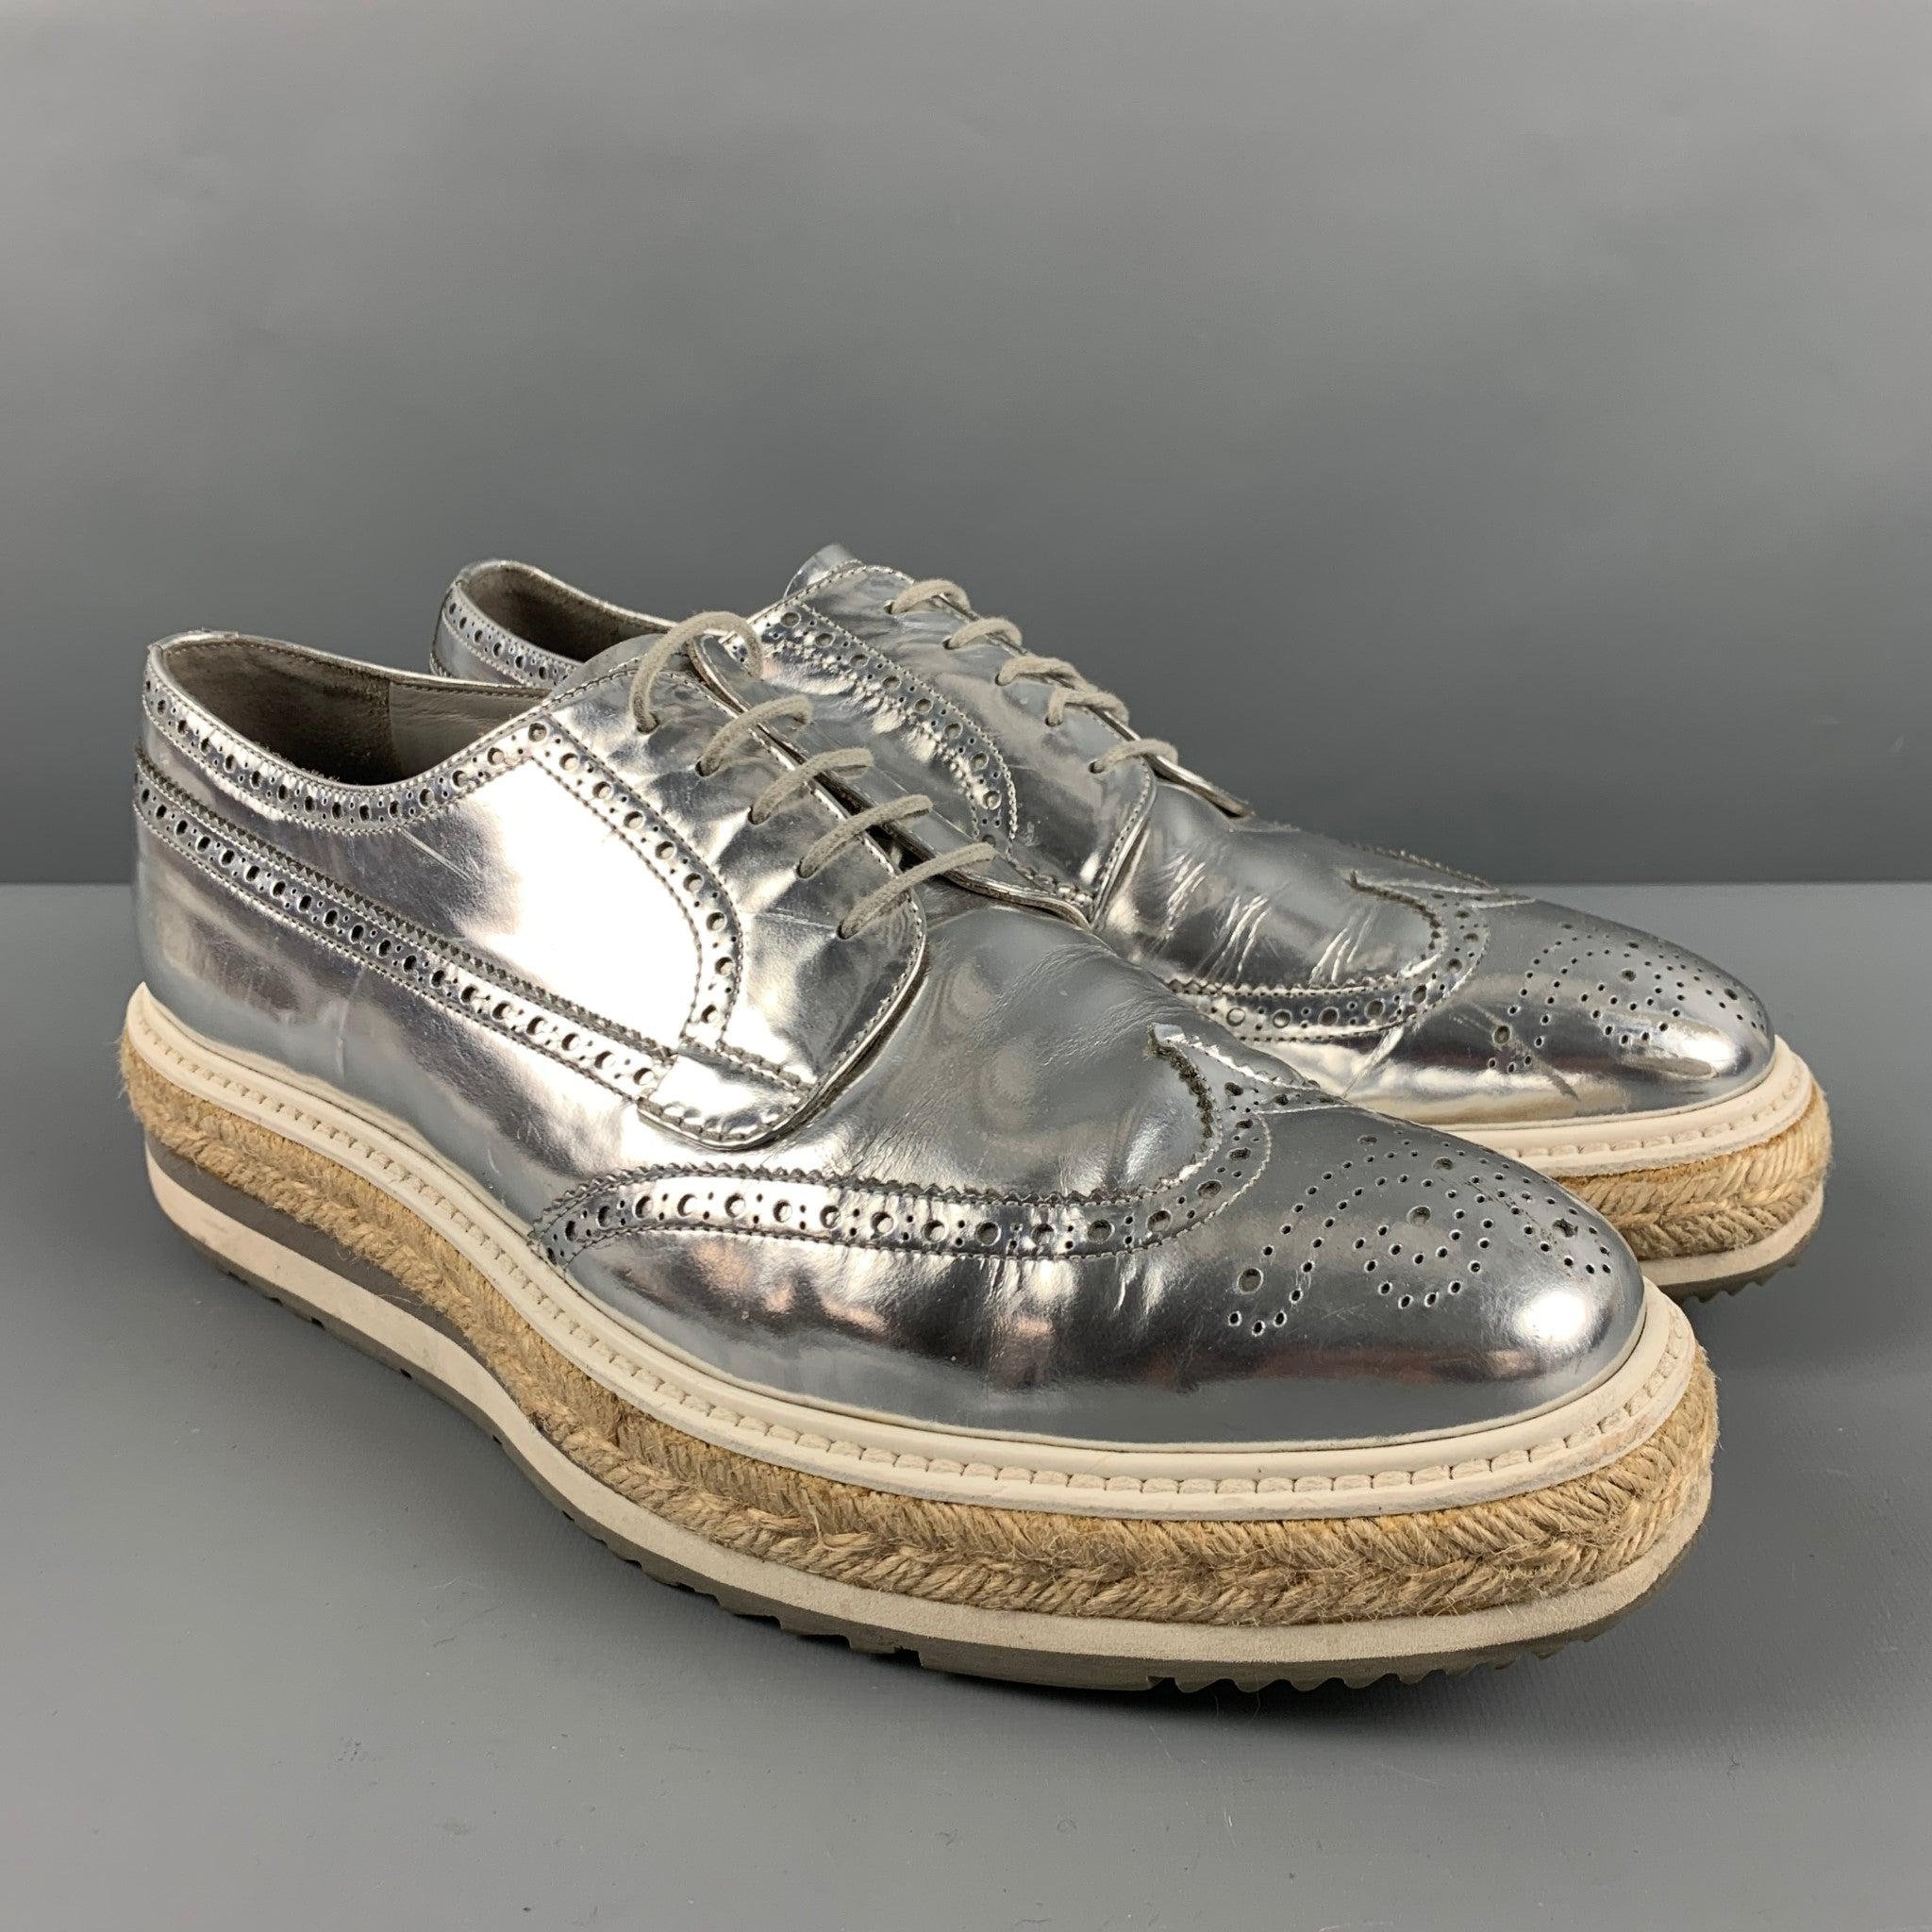 PRADA shoes
in a
metallic silver leather featuring a perforated style, platform sole with rattan detail, and lace-up closure. Made in Italy.Very Good Pre- Owned Condition. Minor signs of wear. 

Marked:   2EG015 9Outsole: 12.5 inches  x 4.25 inches